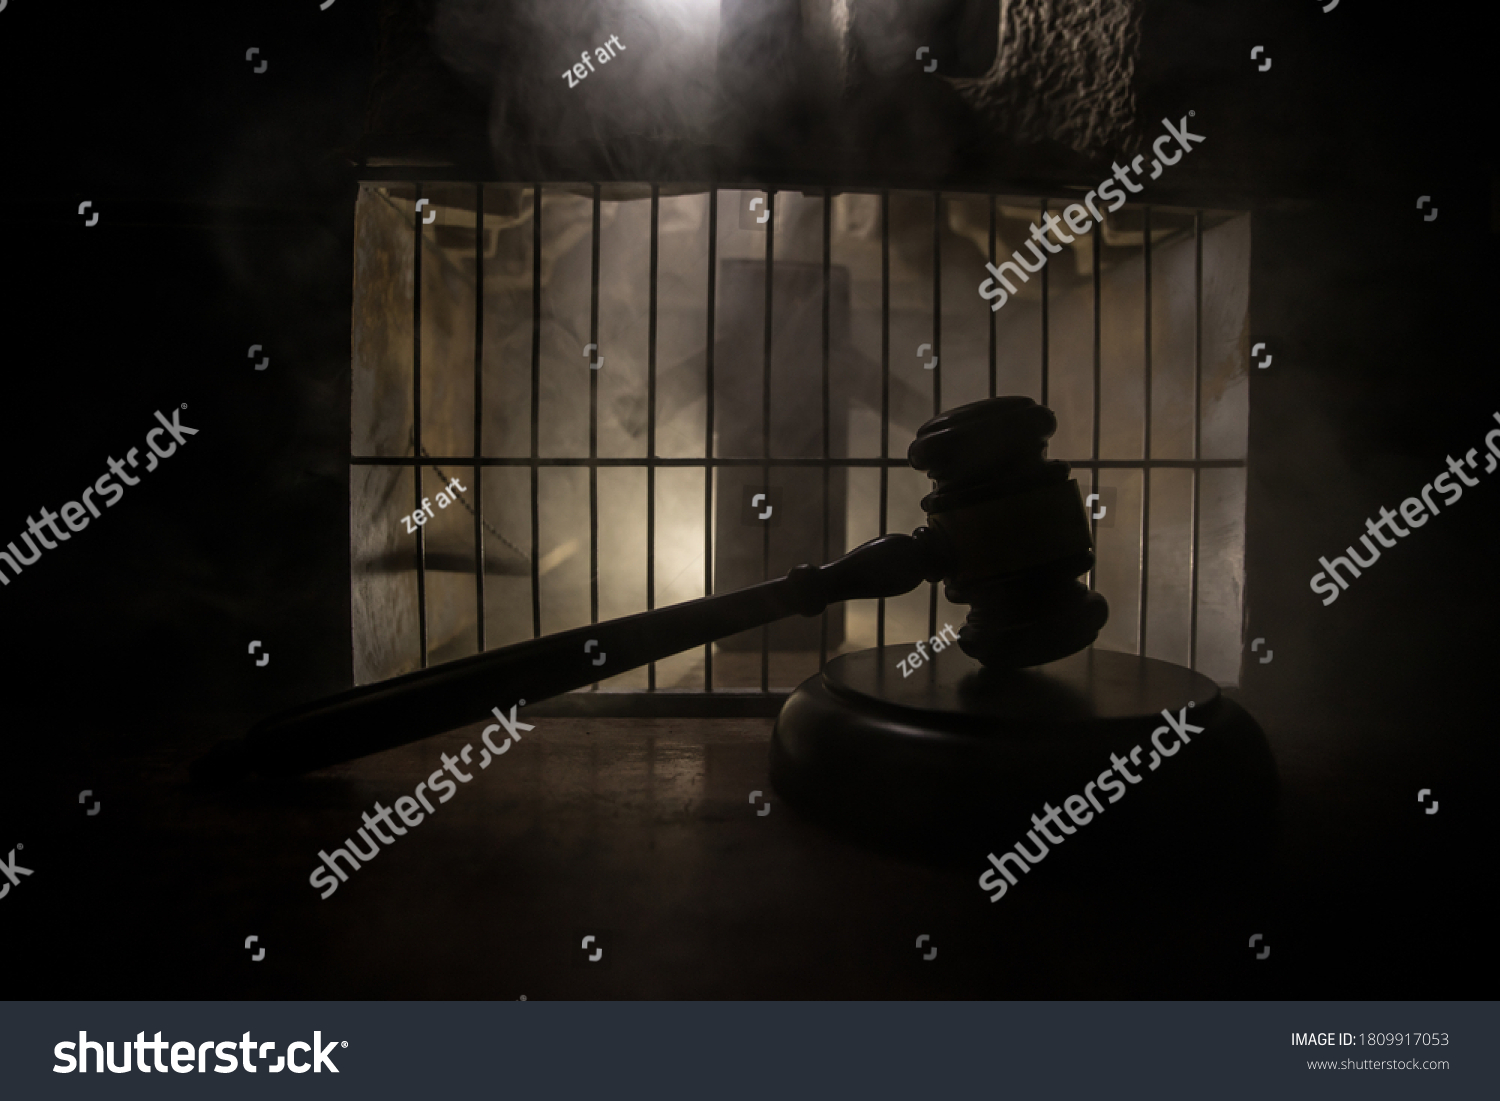 execution-chamber-with-judges-gavel